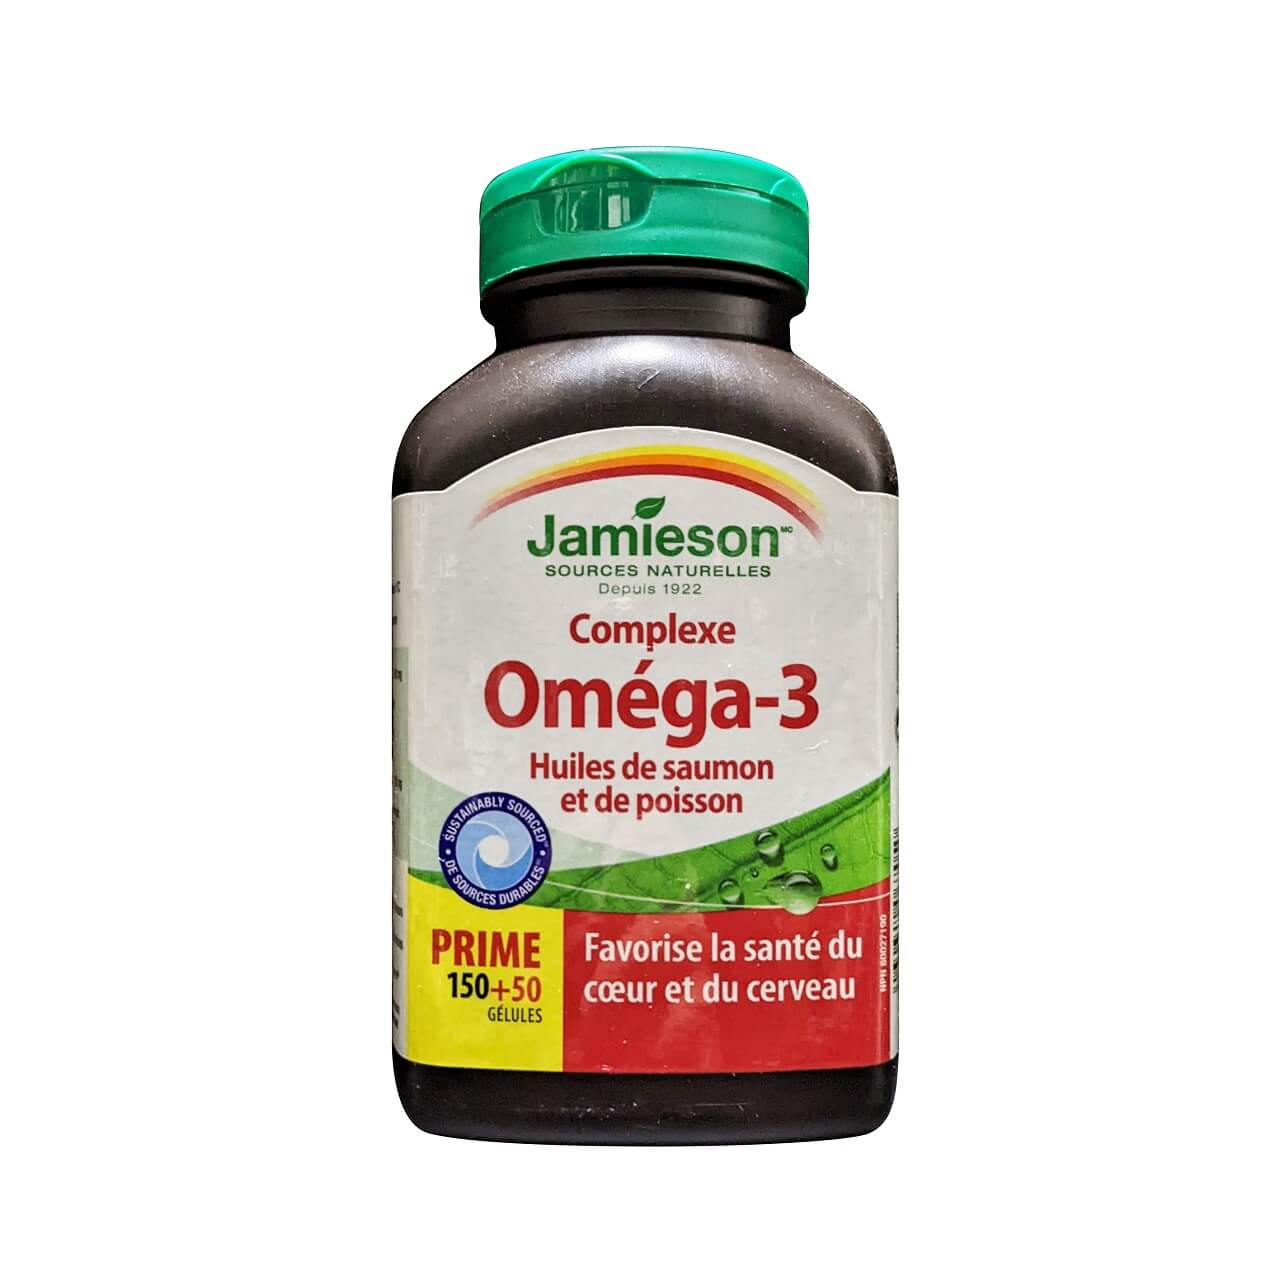 Product label for Jamieson Salmon and Fish Oil Omega-3 Complex (50 softgel bonus) (200 softgels) in French